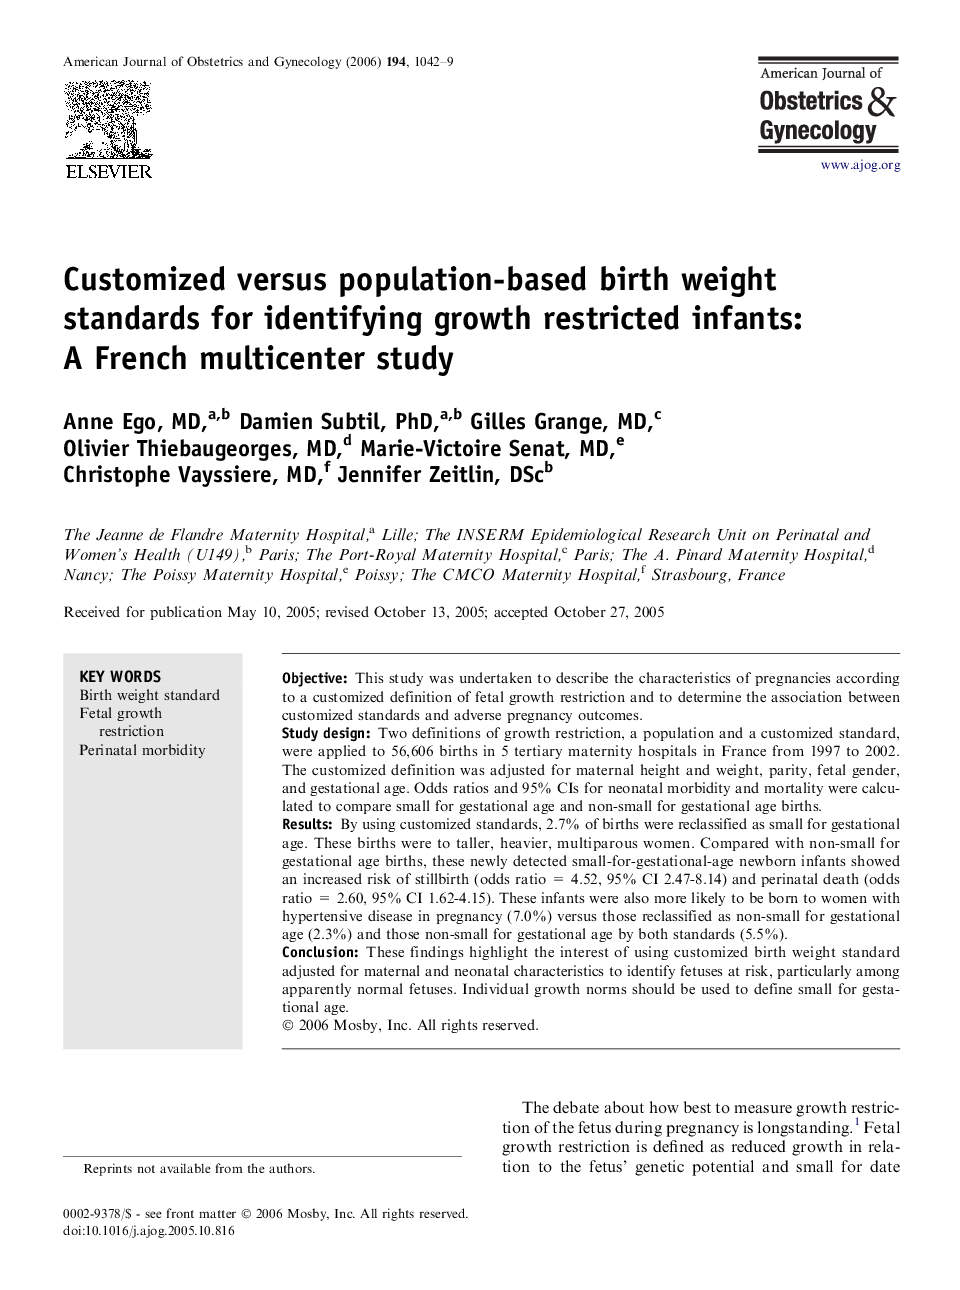 Customized versus population-based birth weight standards for identifying growth restricted infants: A French multicenter study 